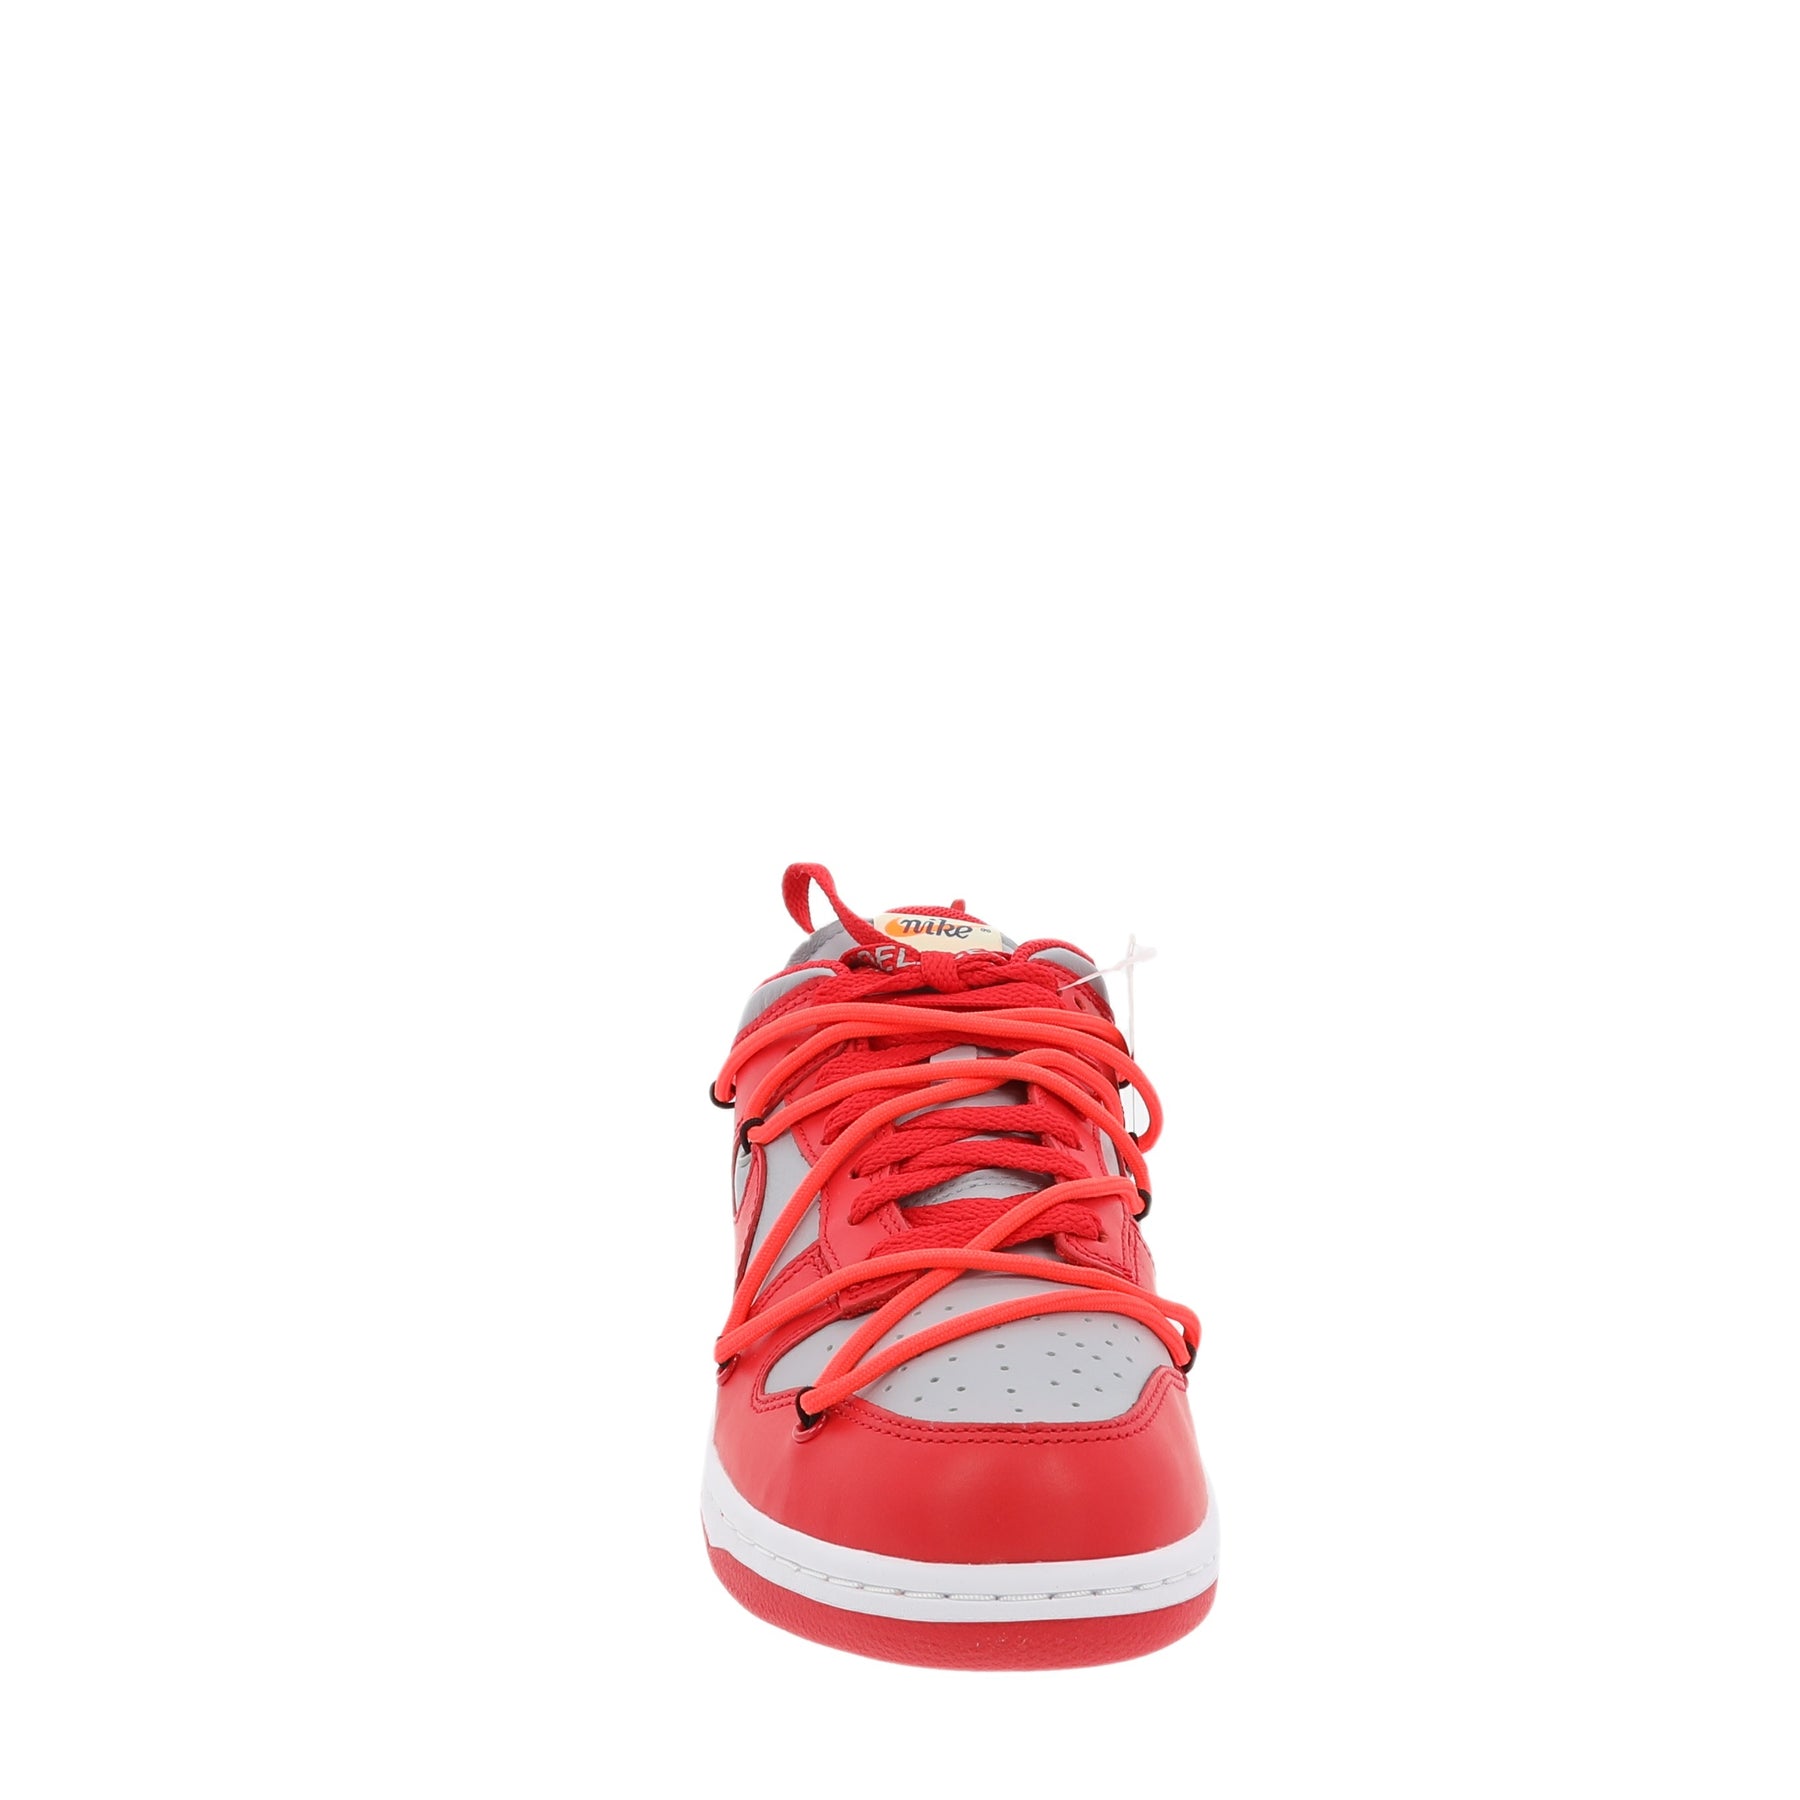 Off White x Nike Dunk Low University Red | 3D model